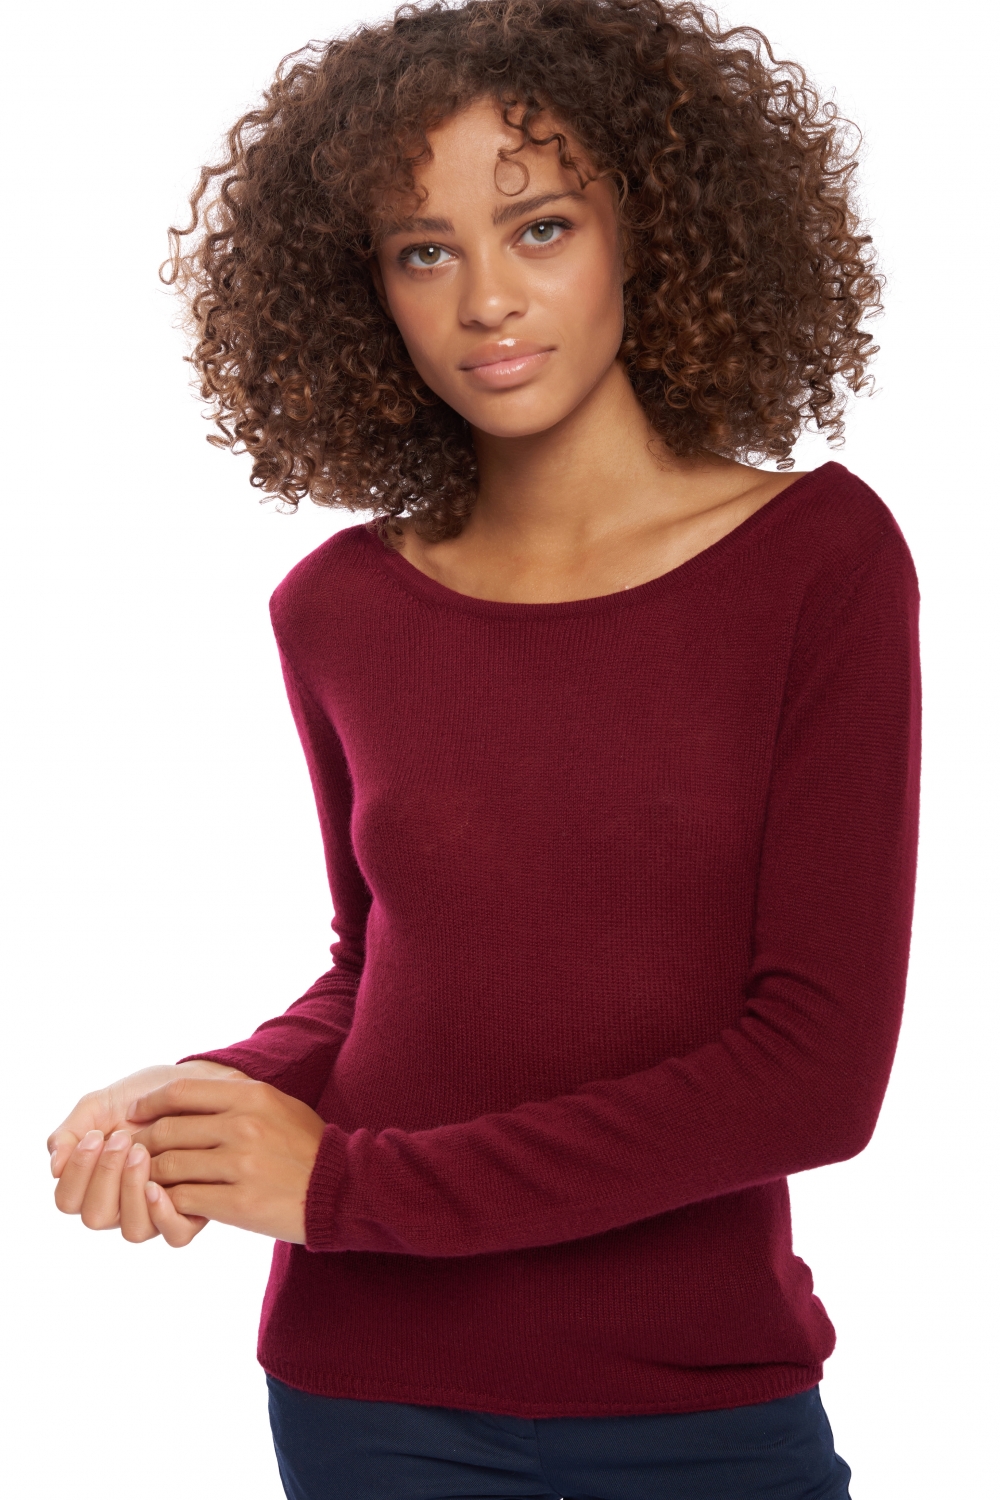 Cashmere ladies basic sweaters at low prices caleen bordeaux 3xl